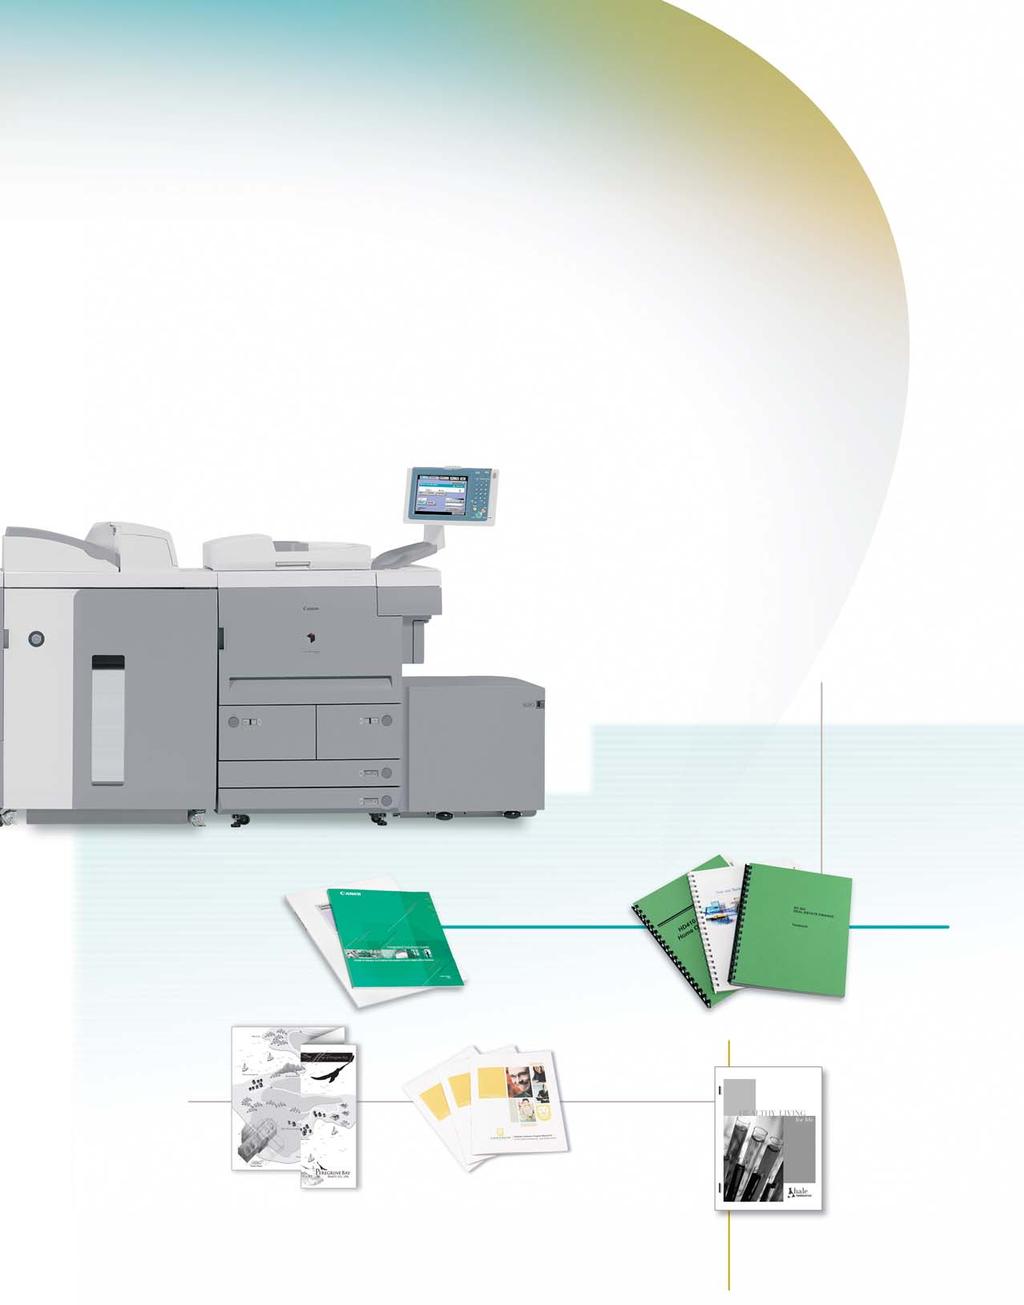 The imagerunner 7105, imagerunner 7095, and imagerunner 7086 devices are modular, allowing you to mix and match the paper supply and advanced finishing accessories you need to meet your diverse